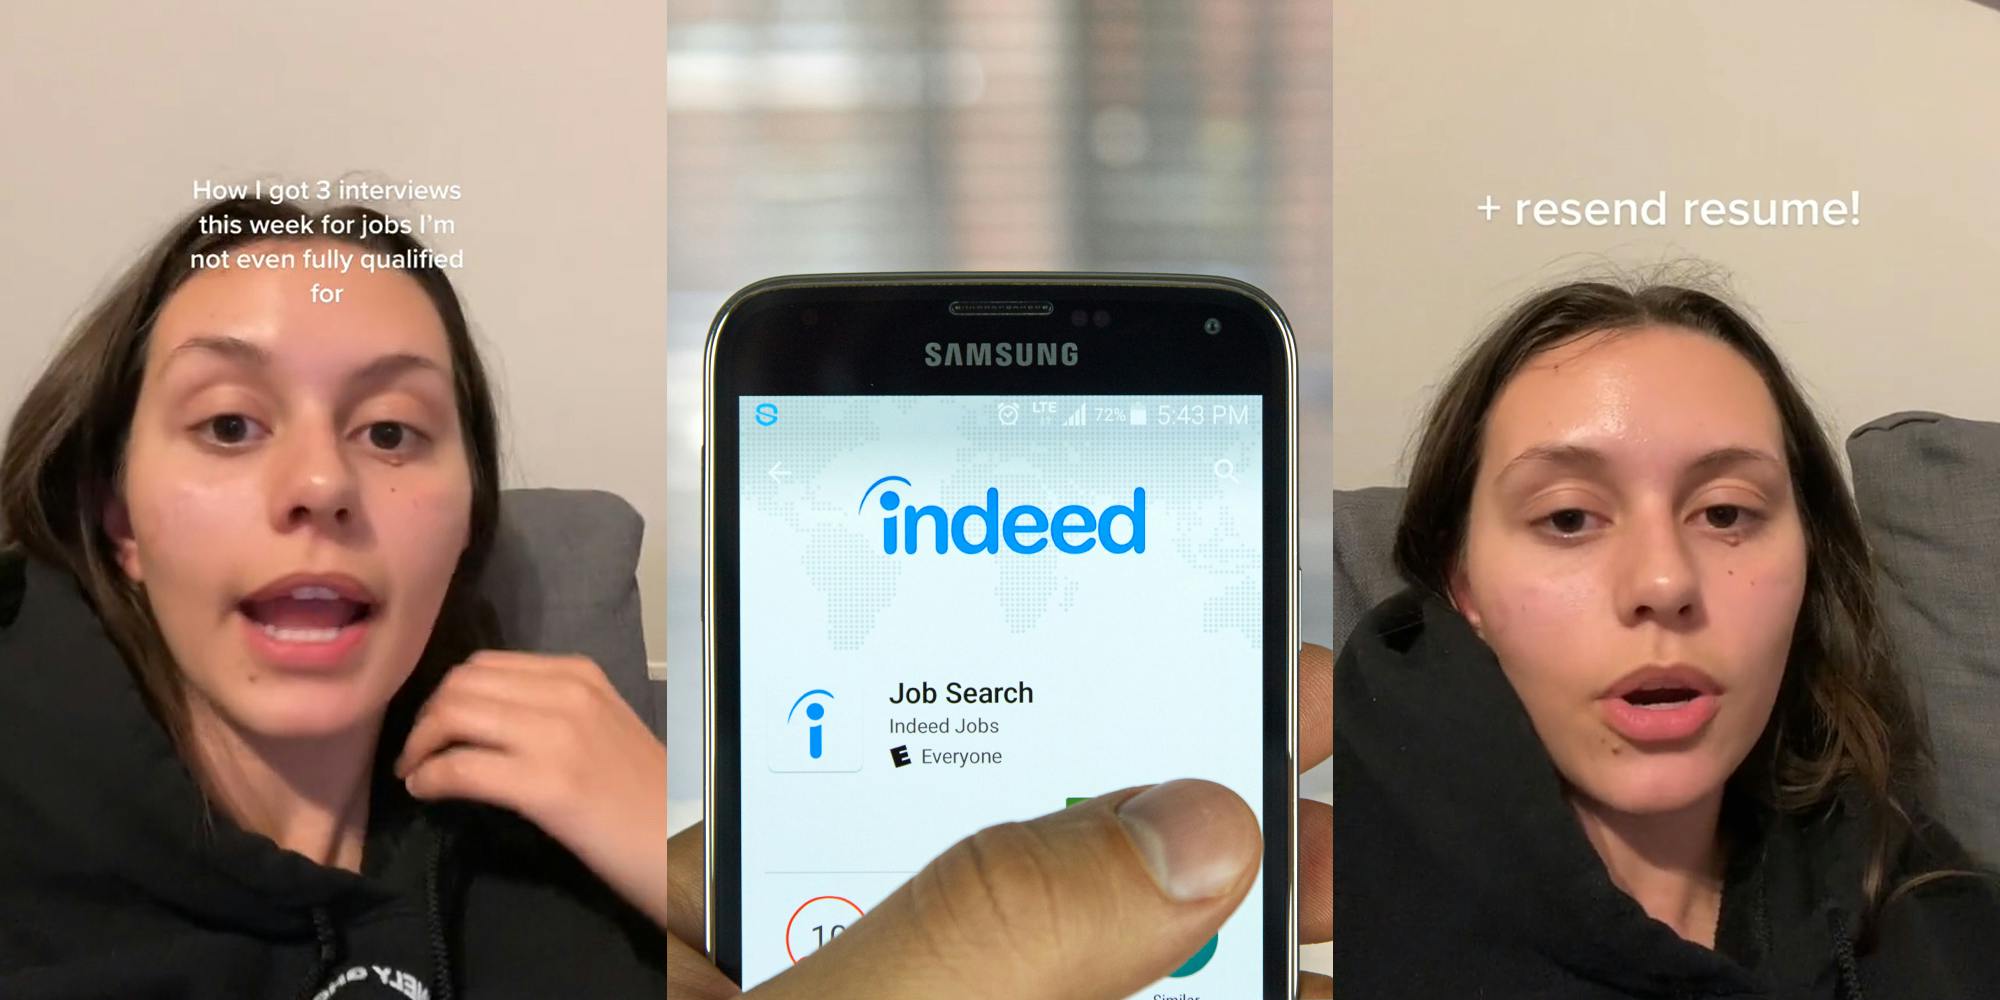 person speaking on couch in front of tan wall with caption "How I got 3 interviews this week for jobs I'm not even fully qualified for" (l) hand holding phone with Indeed on screen in front of blurred background (c) person speaking on couch in front of tan wall with caption "+ resend resume!" (r)